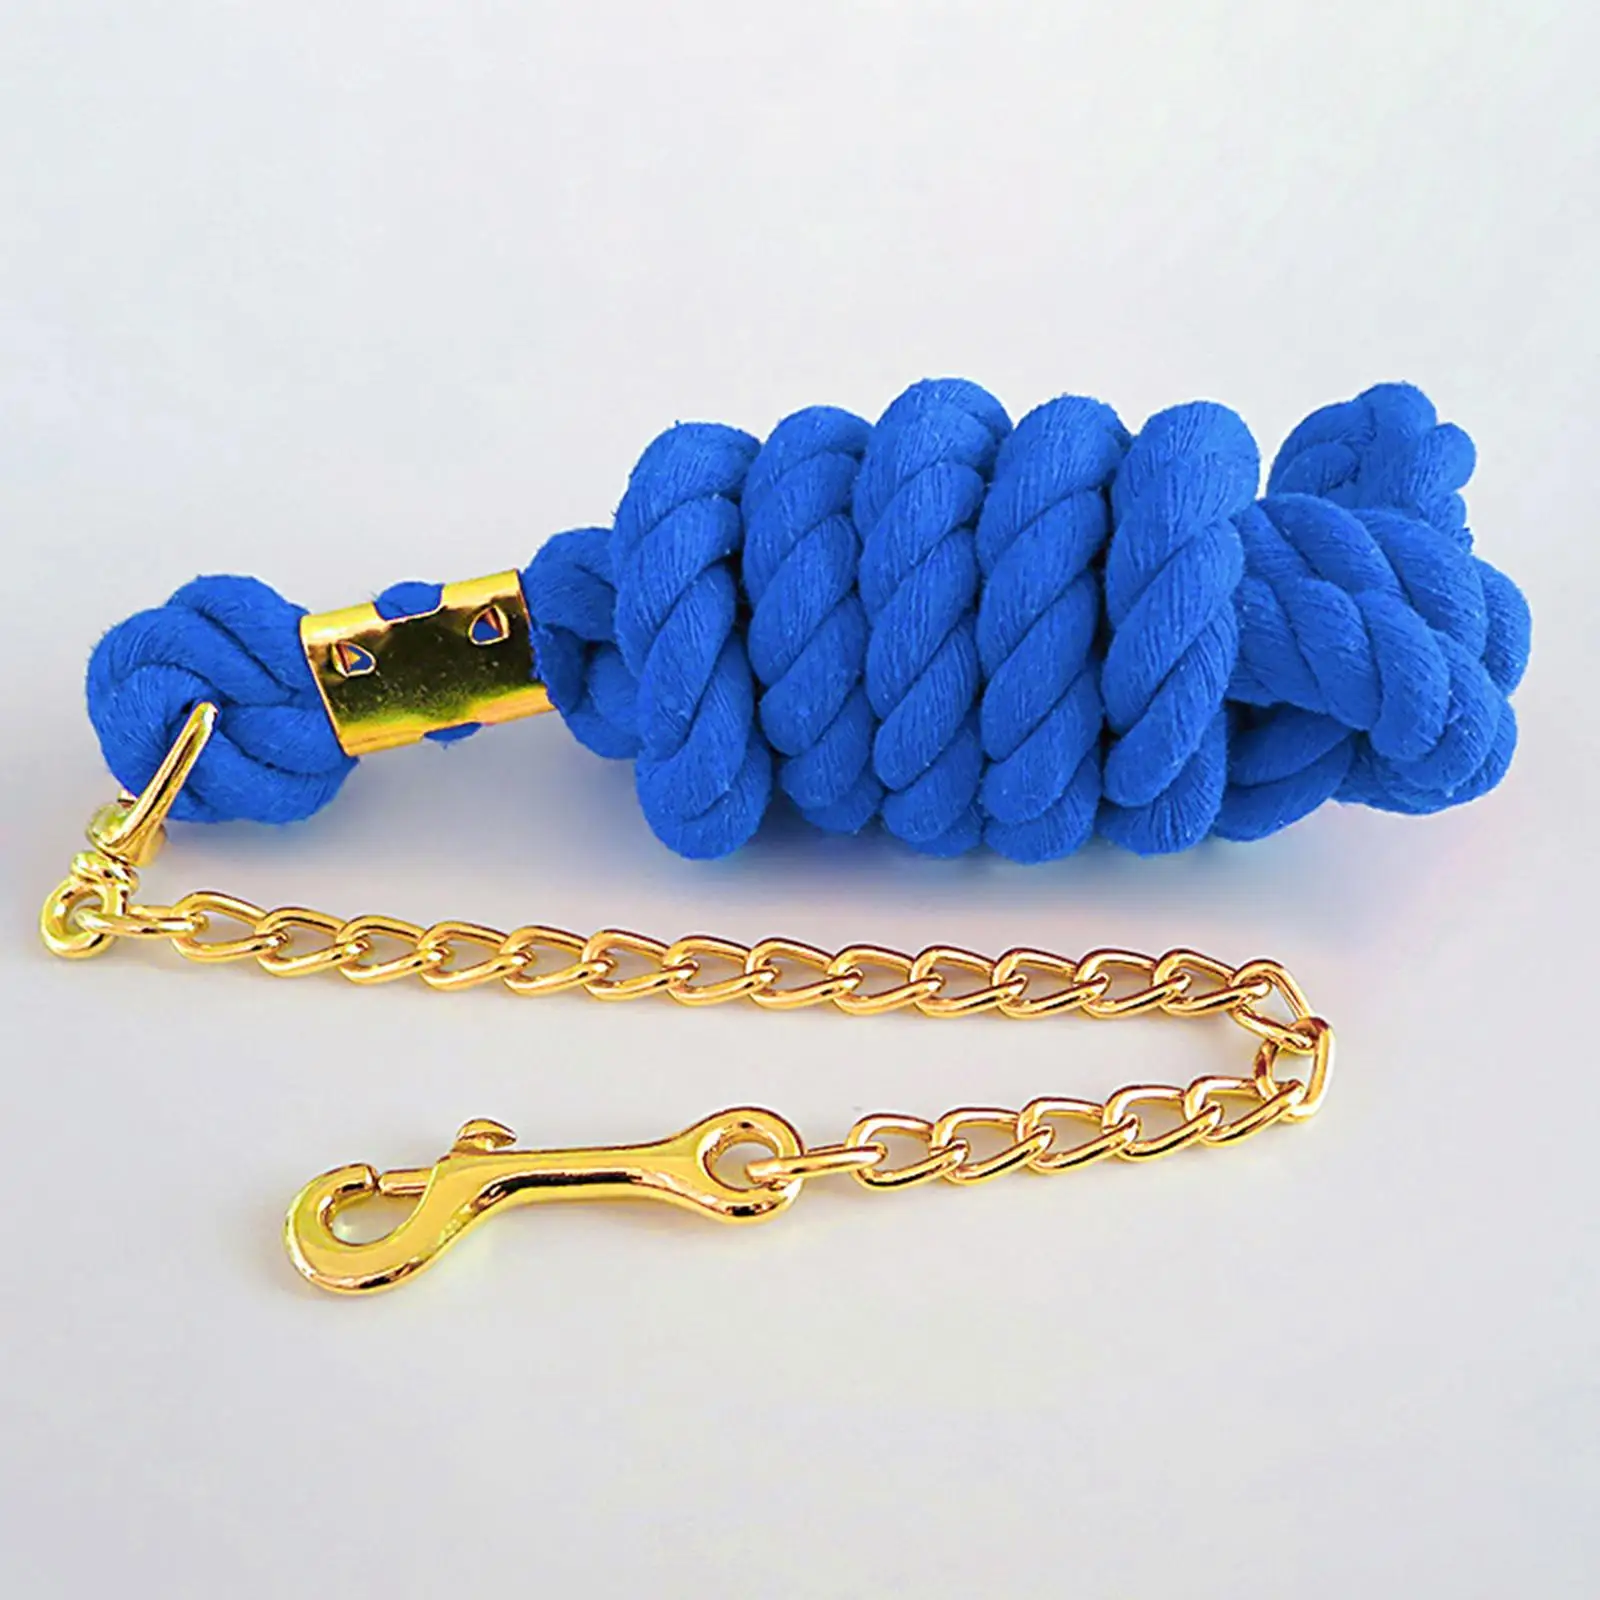 Solid Cotton Horse Leading Rope with Chain Durable Handmade Professional